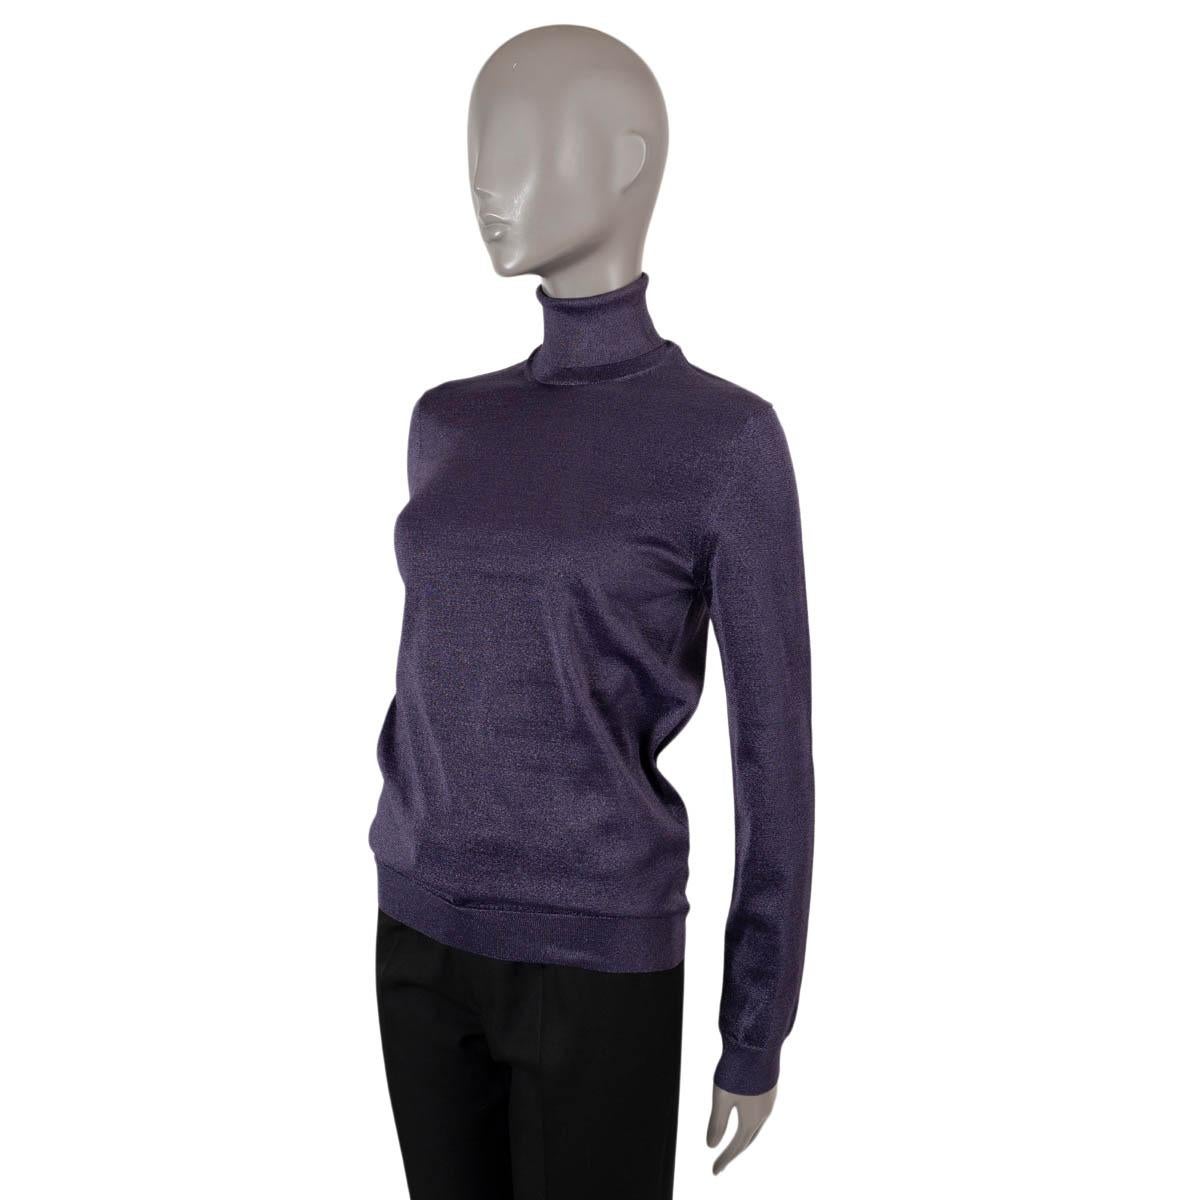 100% authentic Louis Vuitton turtleneck sweater in metallic purple polyester (100%). Features rib knit cuffs and hem. Unlined. Has been worn and is in excellent condition. Please note the brand label and size tag have been removed.

Matching